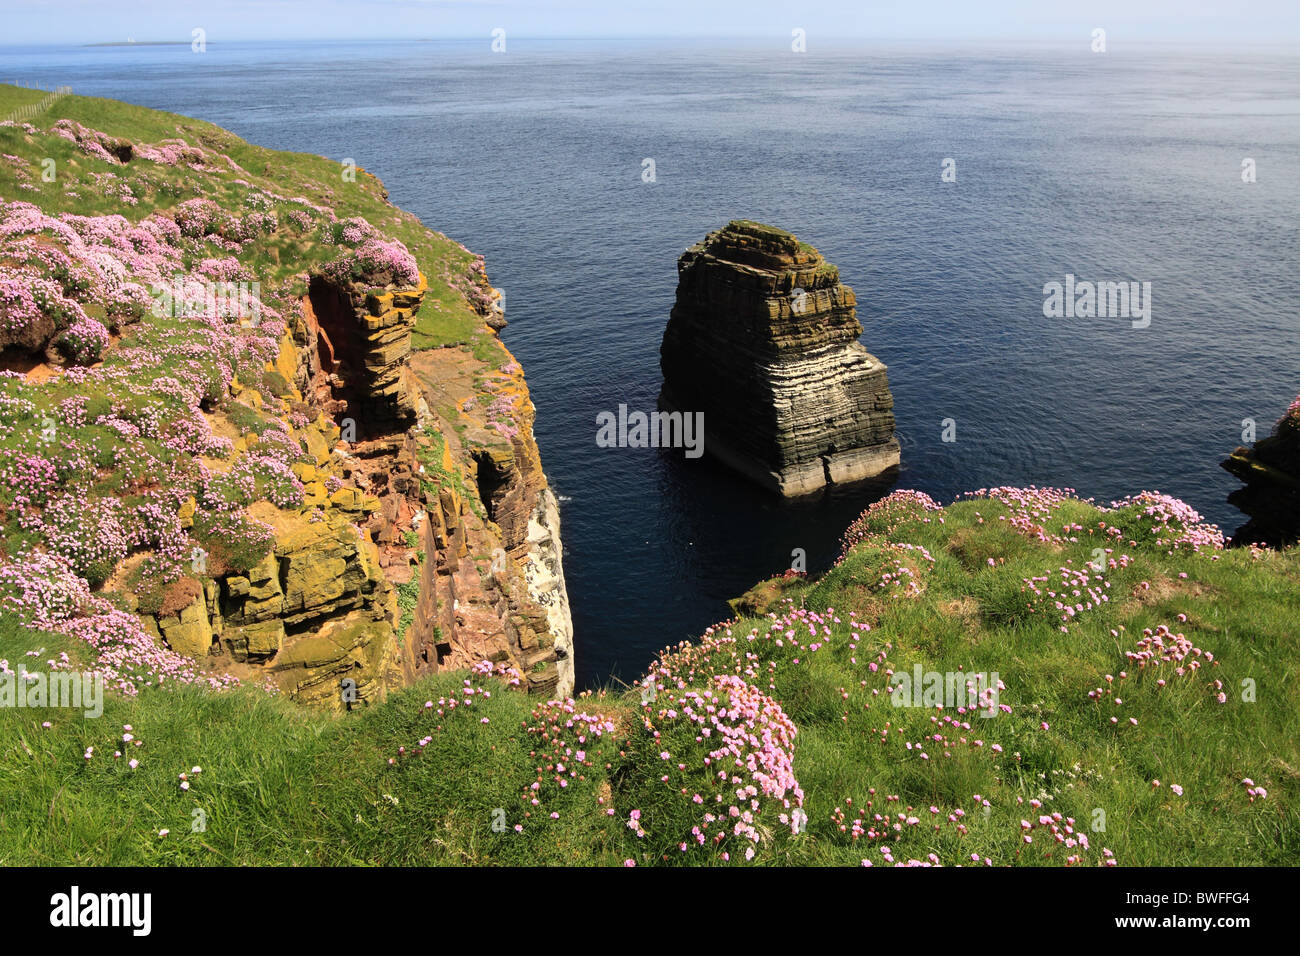 UK Scotland Highland Caithness The Pentland Firth and Rock Stack at Duncansbyhead Stock Photo